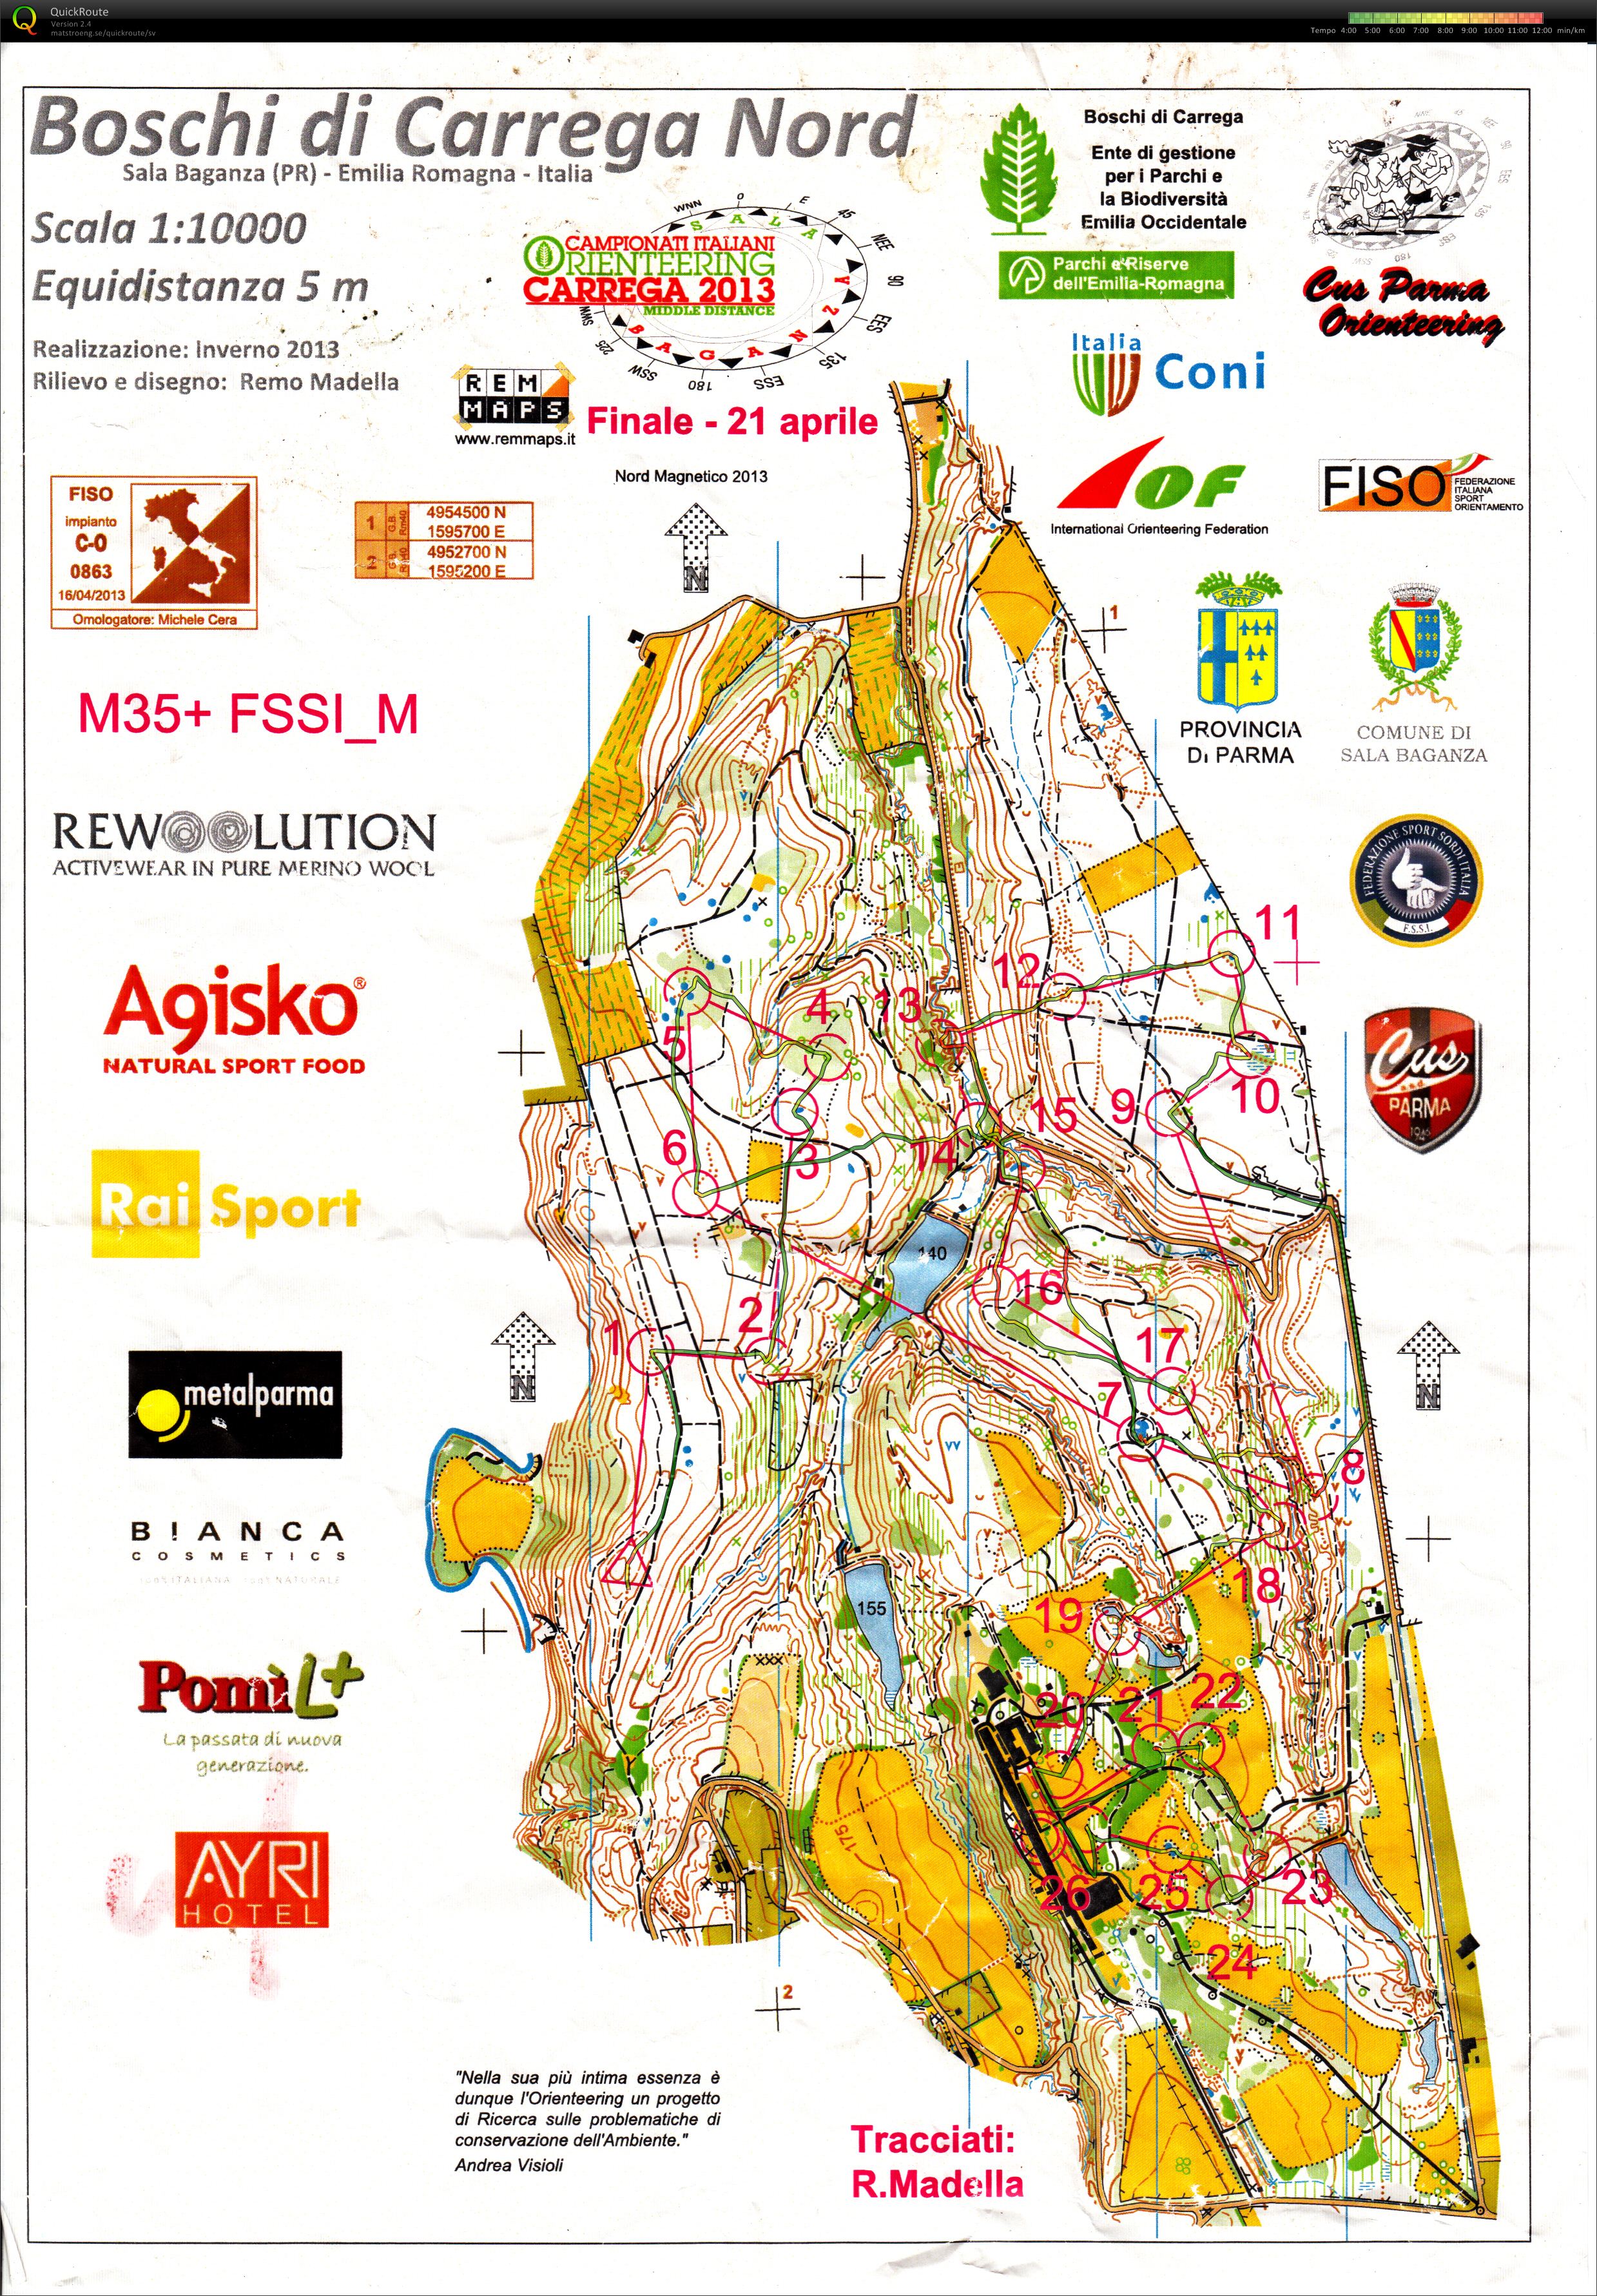 Italian Championship Middle Distance Final (21/04/2013)